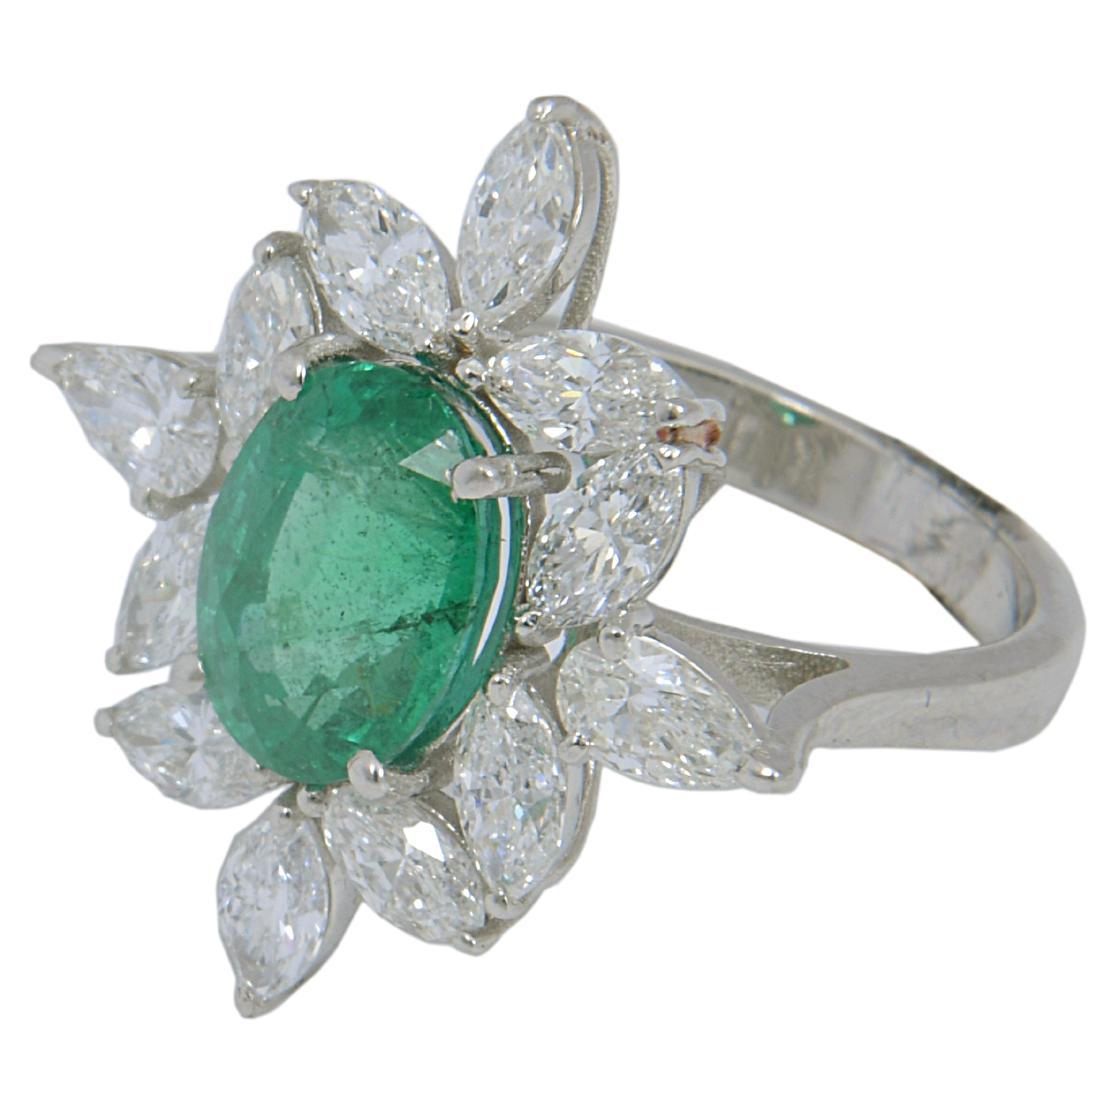 Natural Emerald Ring with 2.81 Carat Diamond & 2.91 Cts Emerald in 14k Gold